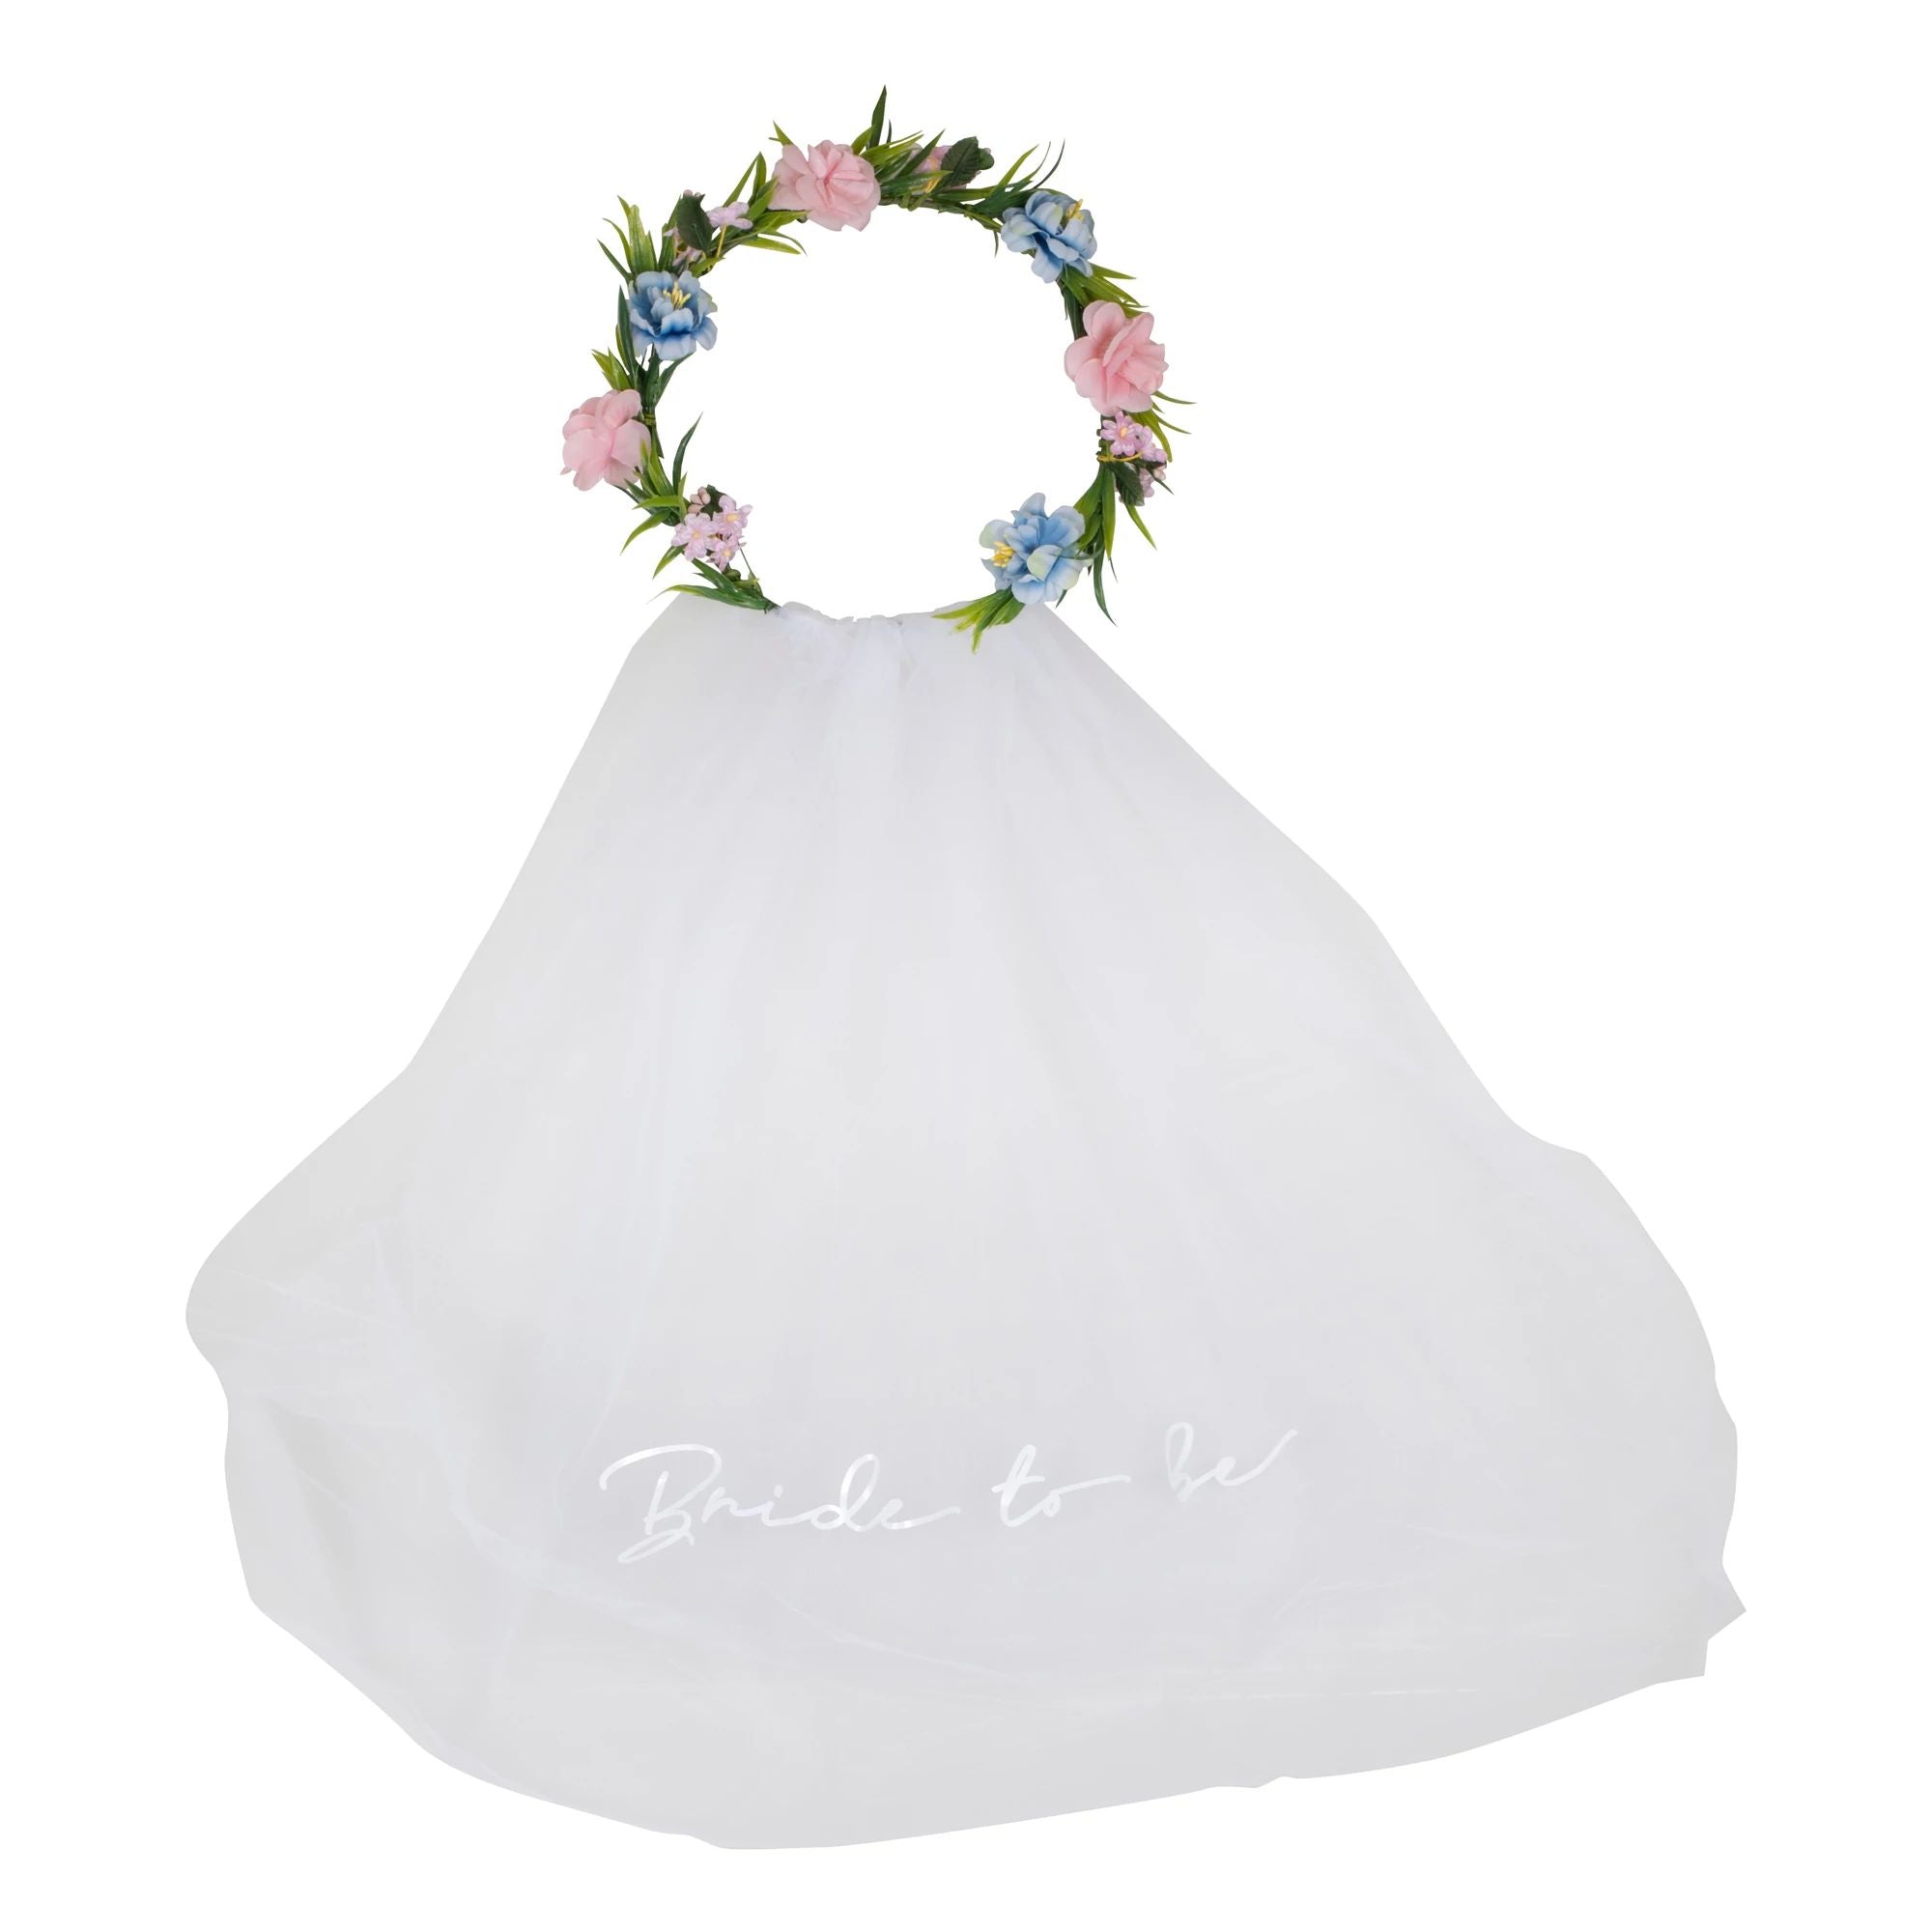 Ginger Ray WEDDING Ginger Ray Floral Headband w/ Embroidered Veil - Meadow